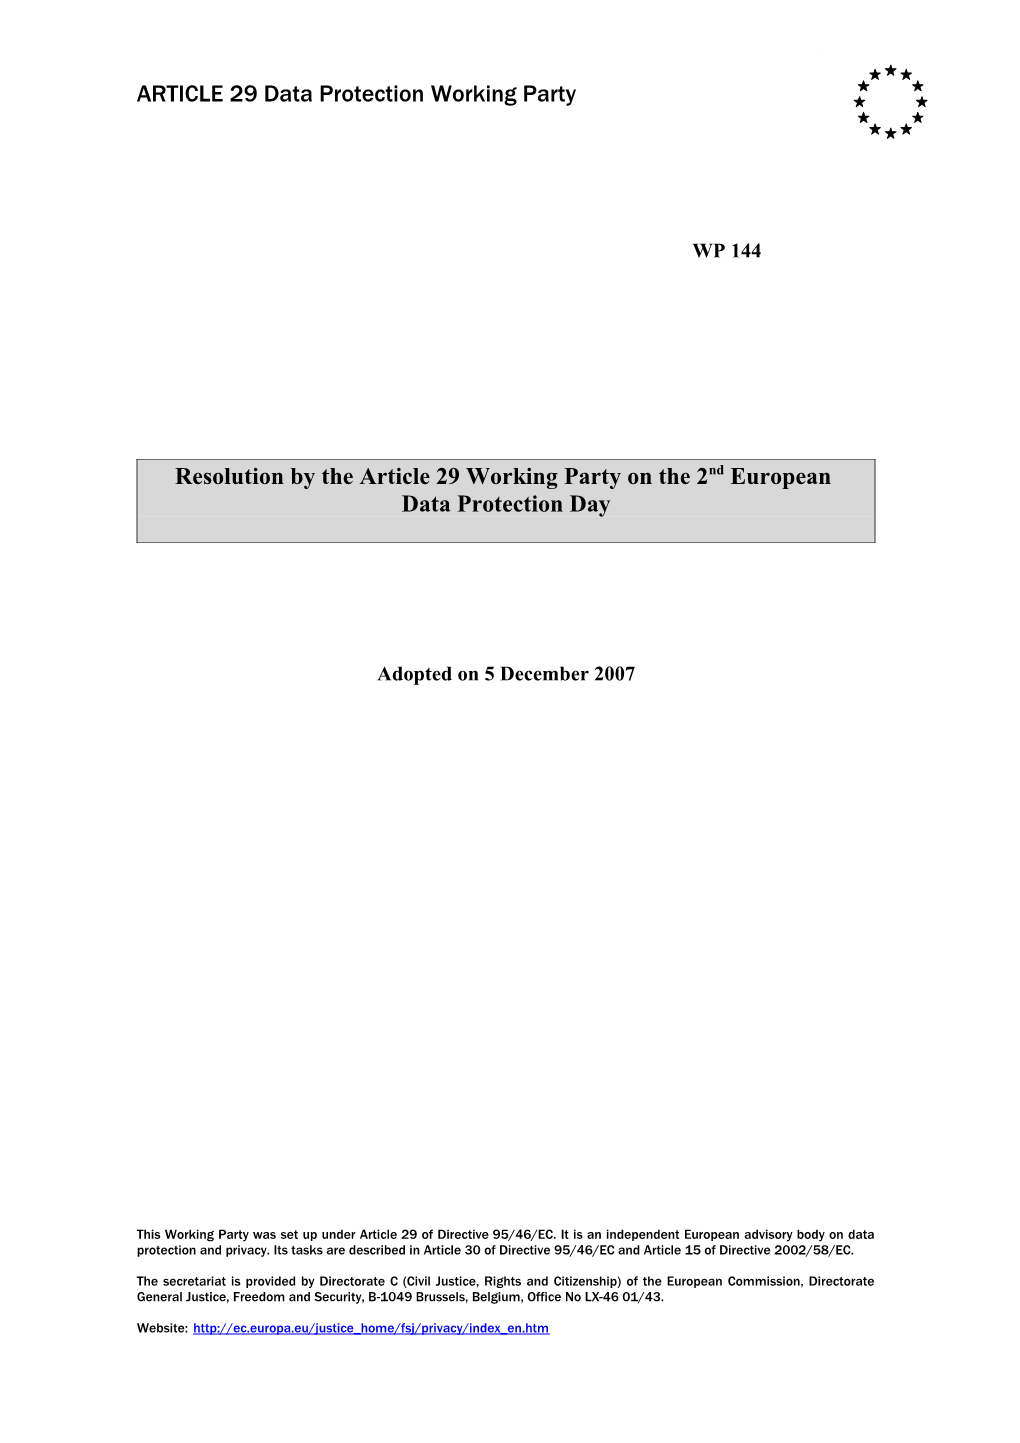 Resolution by the Article 29 Working Party on the 2Nd European